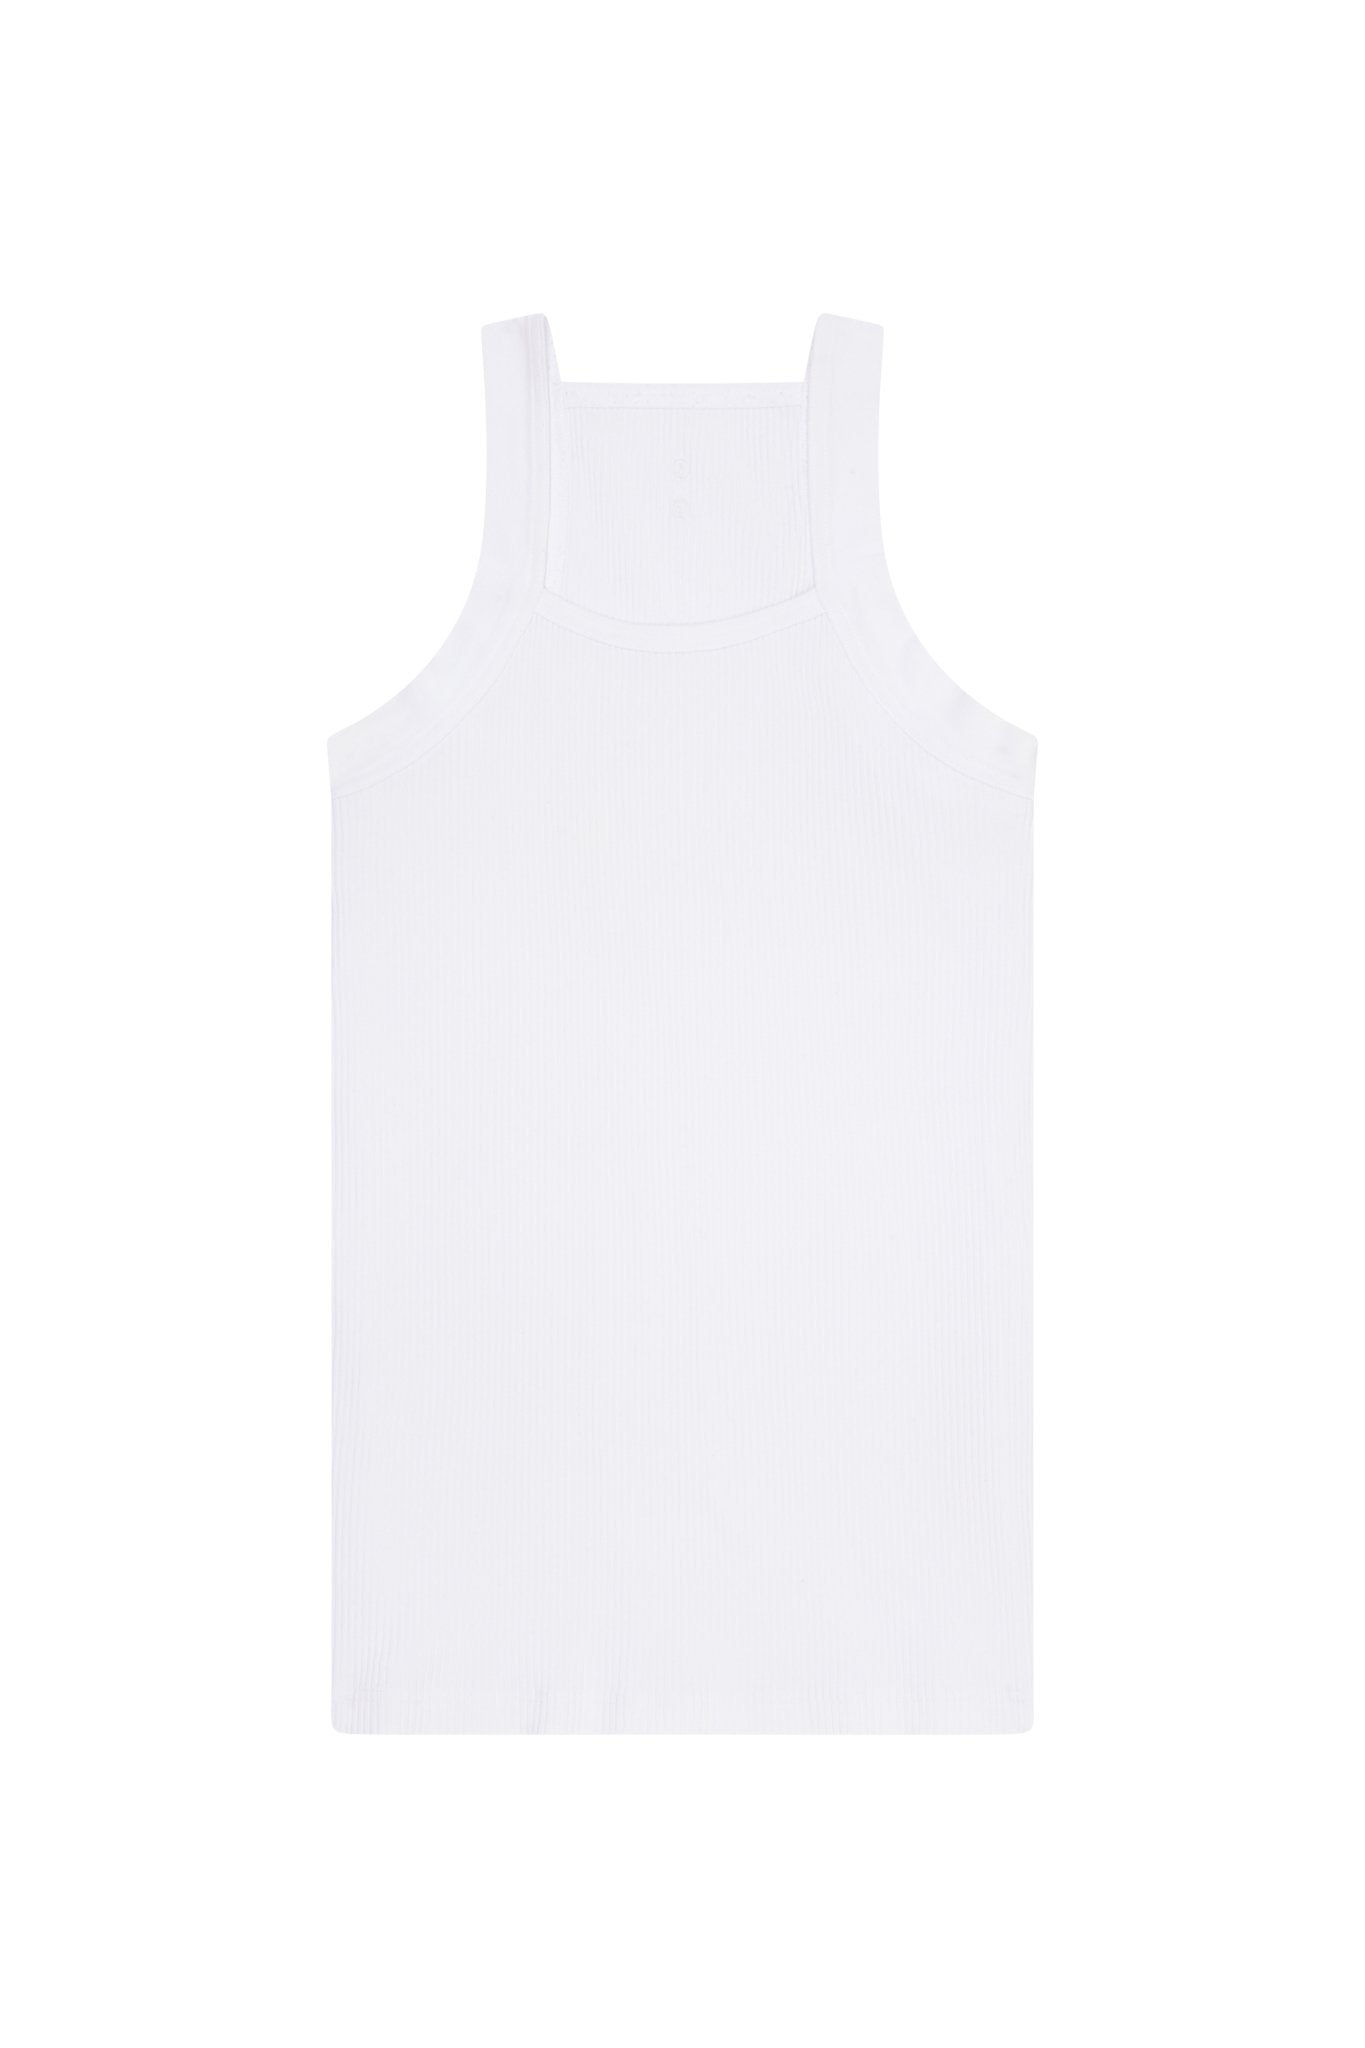 about---blank.comribbed tank top white (2 pack)